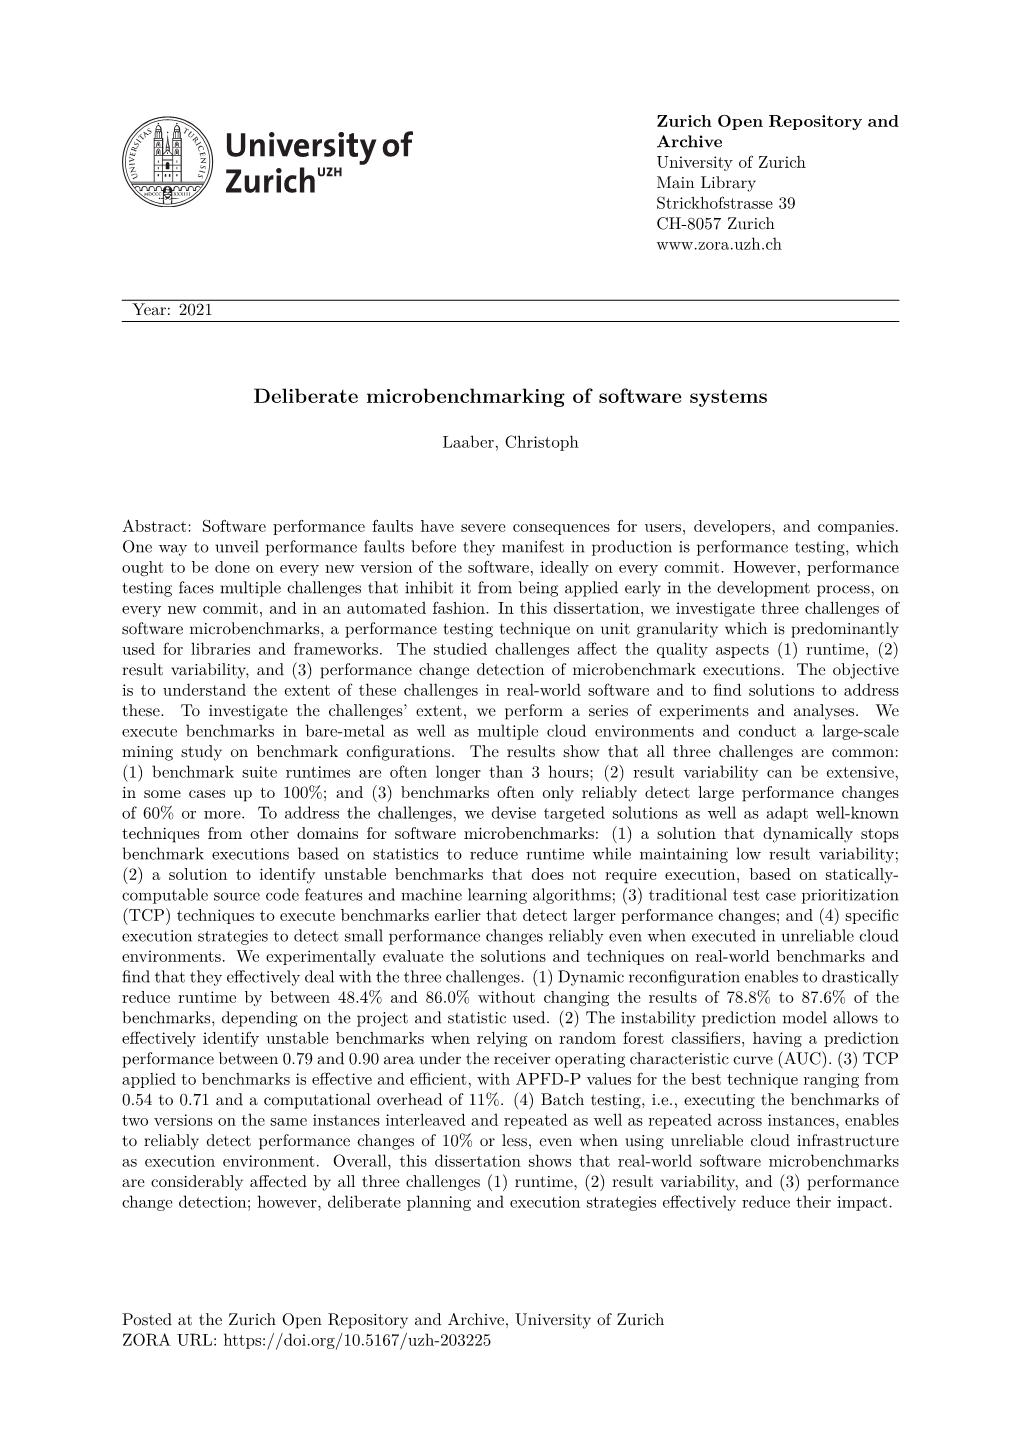 Download PDF 'Deliberate Microbenchmarking of Software